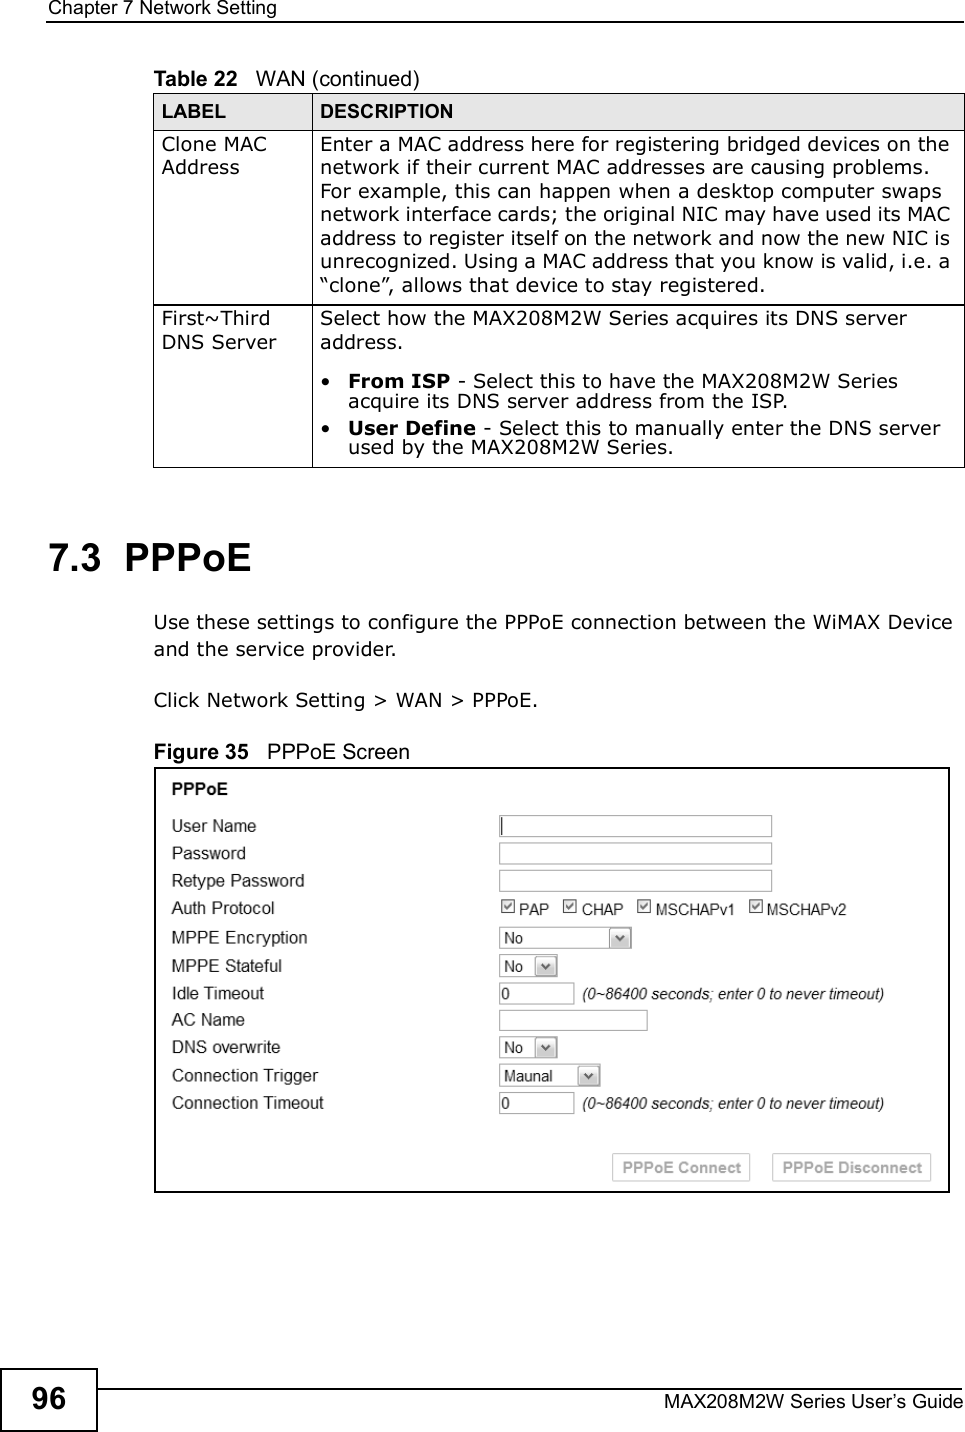 Chapter 7Network SettingMAX208M2W Series User s Guide967.3  PPPoEUse these settings to configure the PPPoE connection between the WiMAX Device and the service provider.Click Network Setting &gt; WAN &gt; PPPoE.Figure 35   PPPoE ScreenClone MAC AddressEnter a MAC address here for registering bridged devices on the network if their current MAC addresses are causing problems. For example, this can happen when a desktop computer swaps network interface cards; the original NIC may have used its MAC address to register itself on the network and now the new NIC is unrecognized. Using a MAC address that you know is valid, i.e. a &quot;clone#, allows that device to stay registered.First~Third DNS ServerSelect how the MAX208M2W Series acquires its DNS server address.!From ISP - Select this to have the MAX208M2W Series acquire its DNS server address from the ISP.!User Define - Select this to manually enter the DNS server used by the MAX208M2W Series.Table 22   WAN (continued)LABEL DESCRIPTION